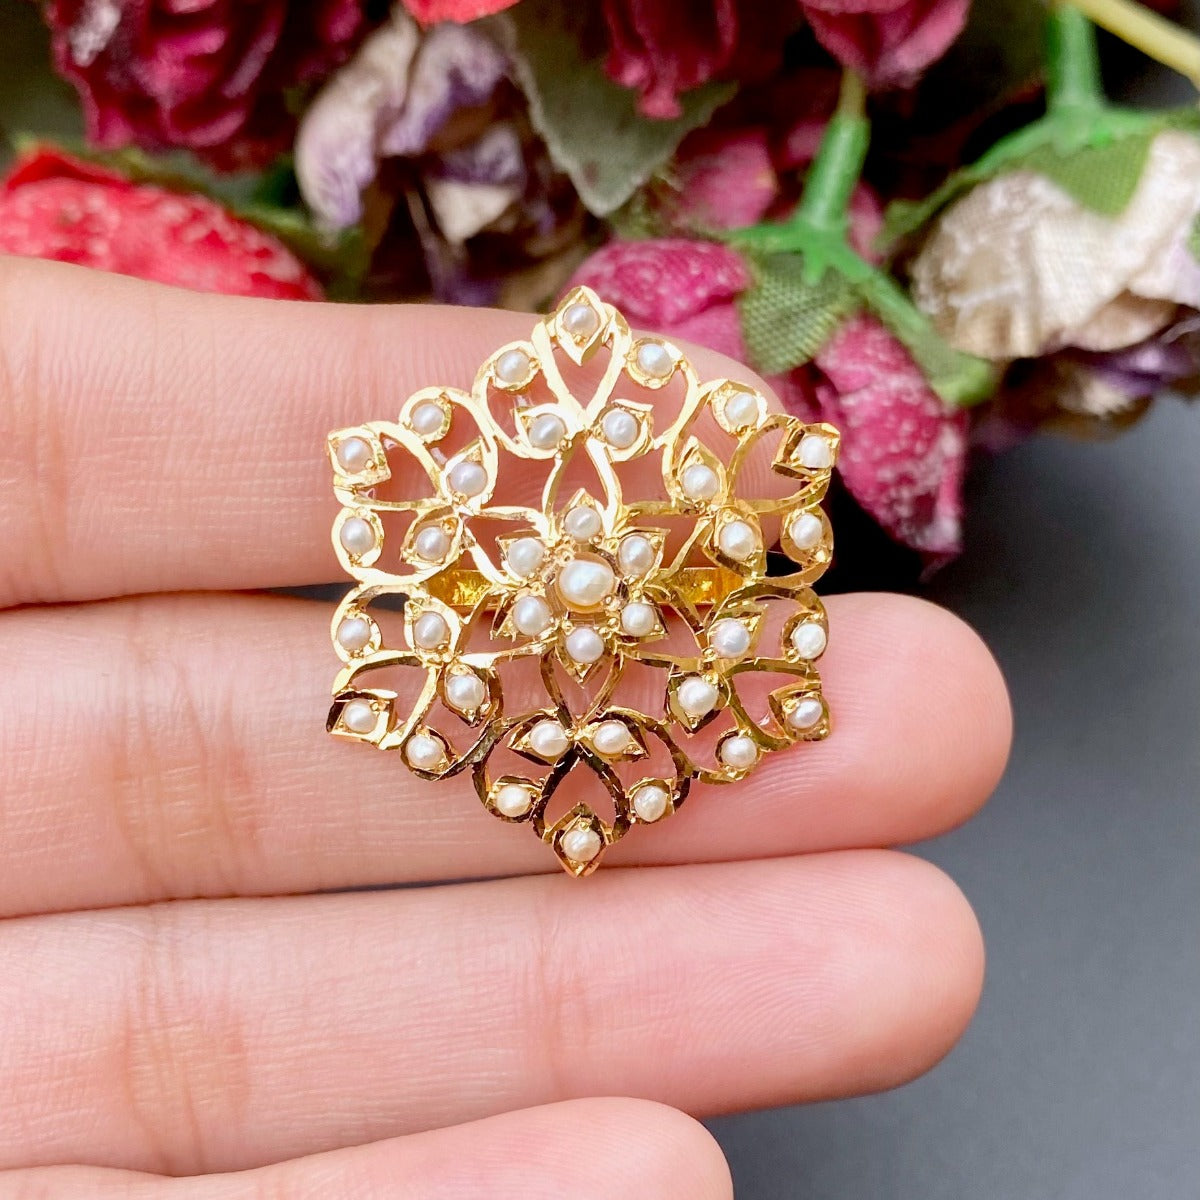 real gold cocktail ring with pearls